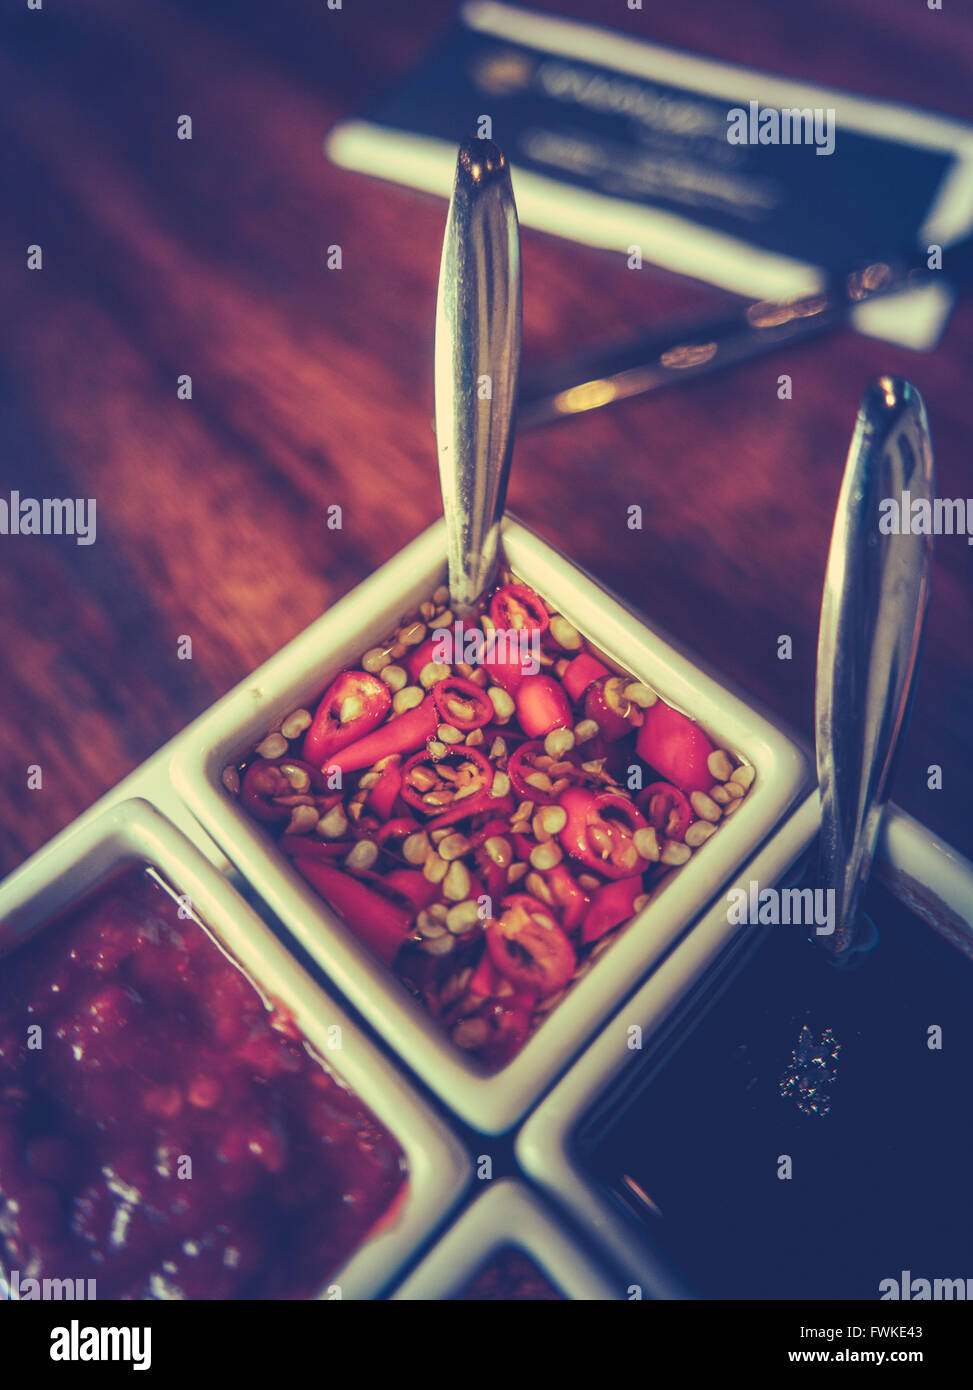 Asian Seasoning And Flavours On A Restaurant Table Stock Photo